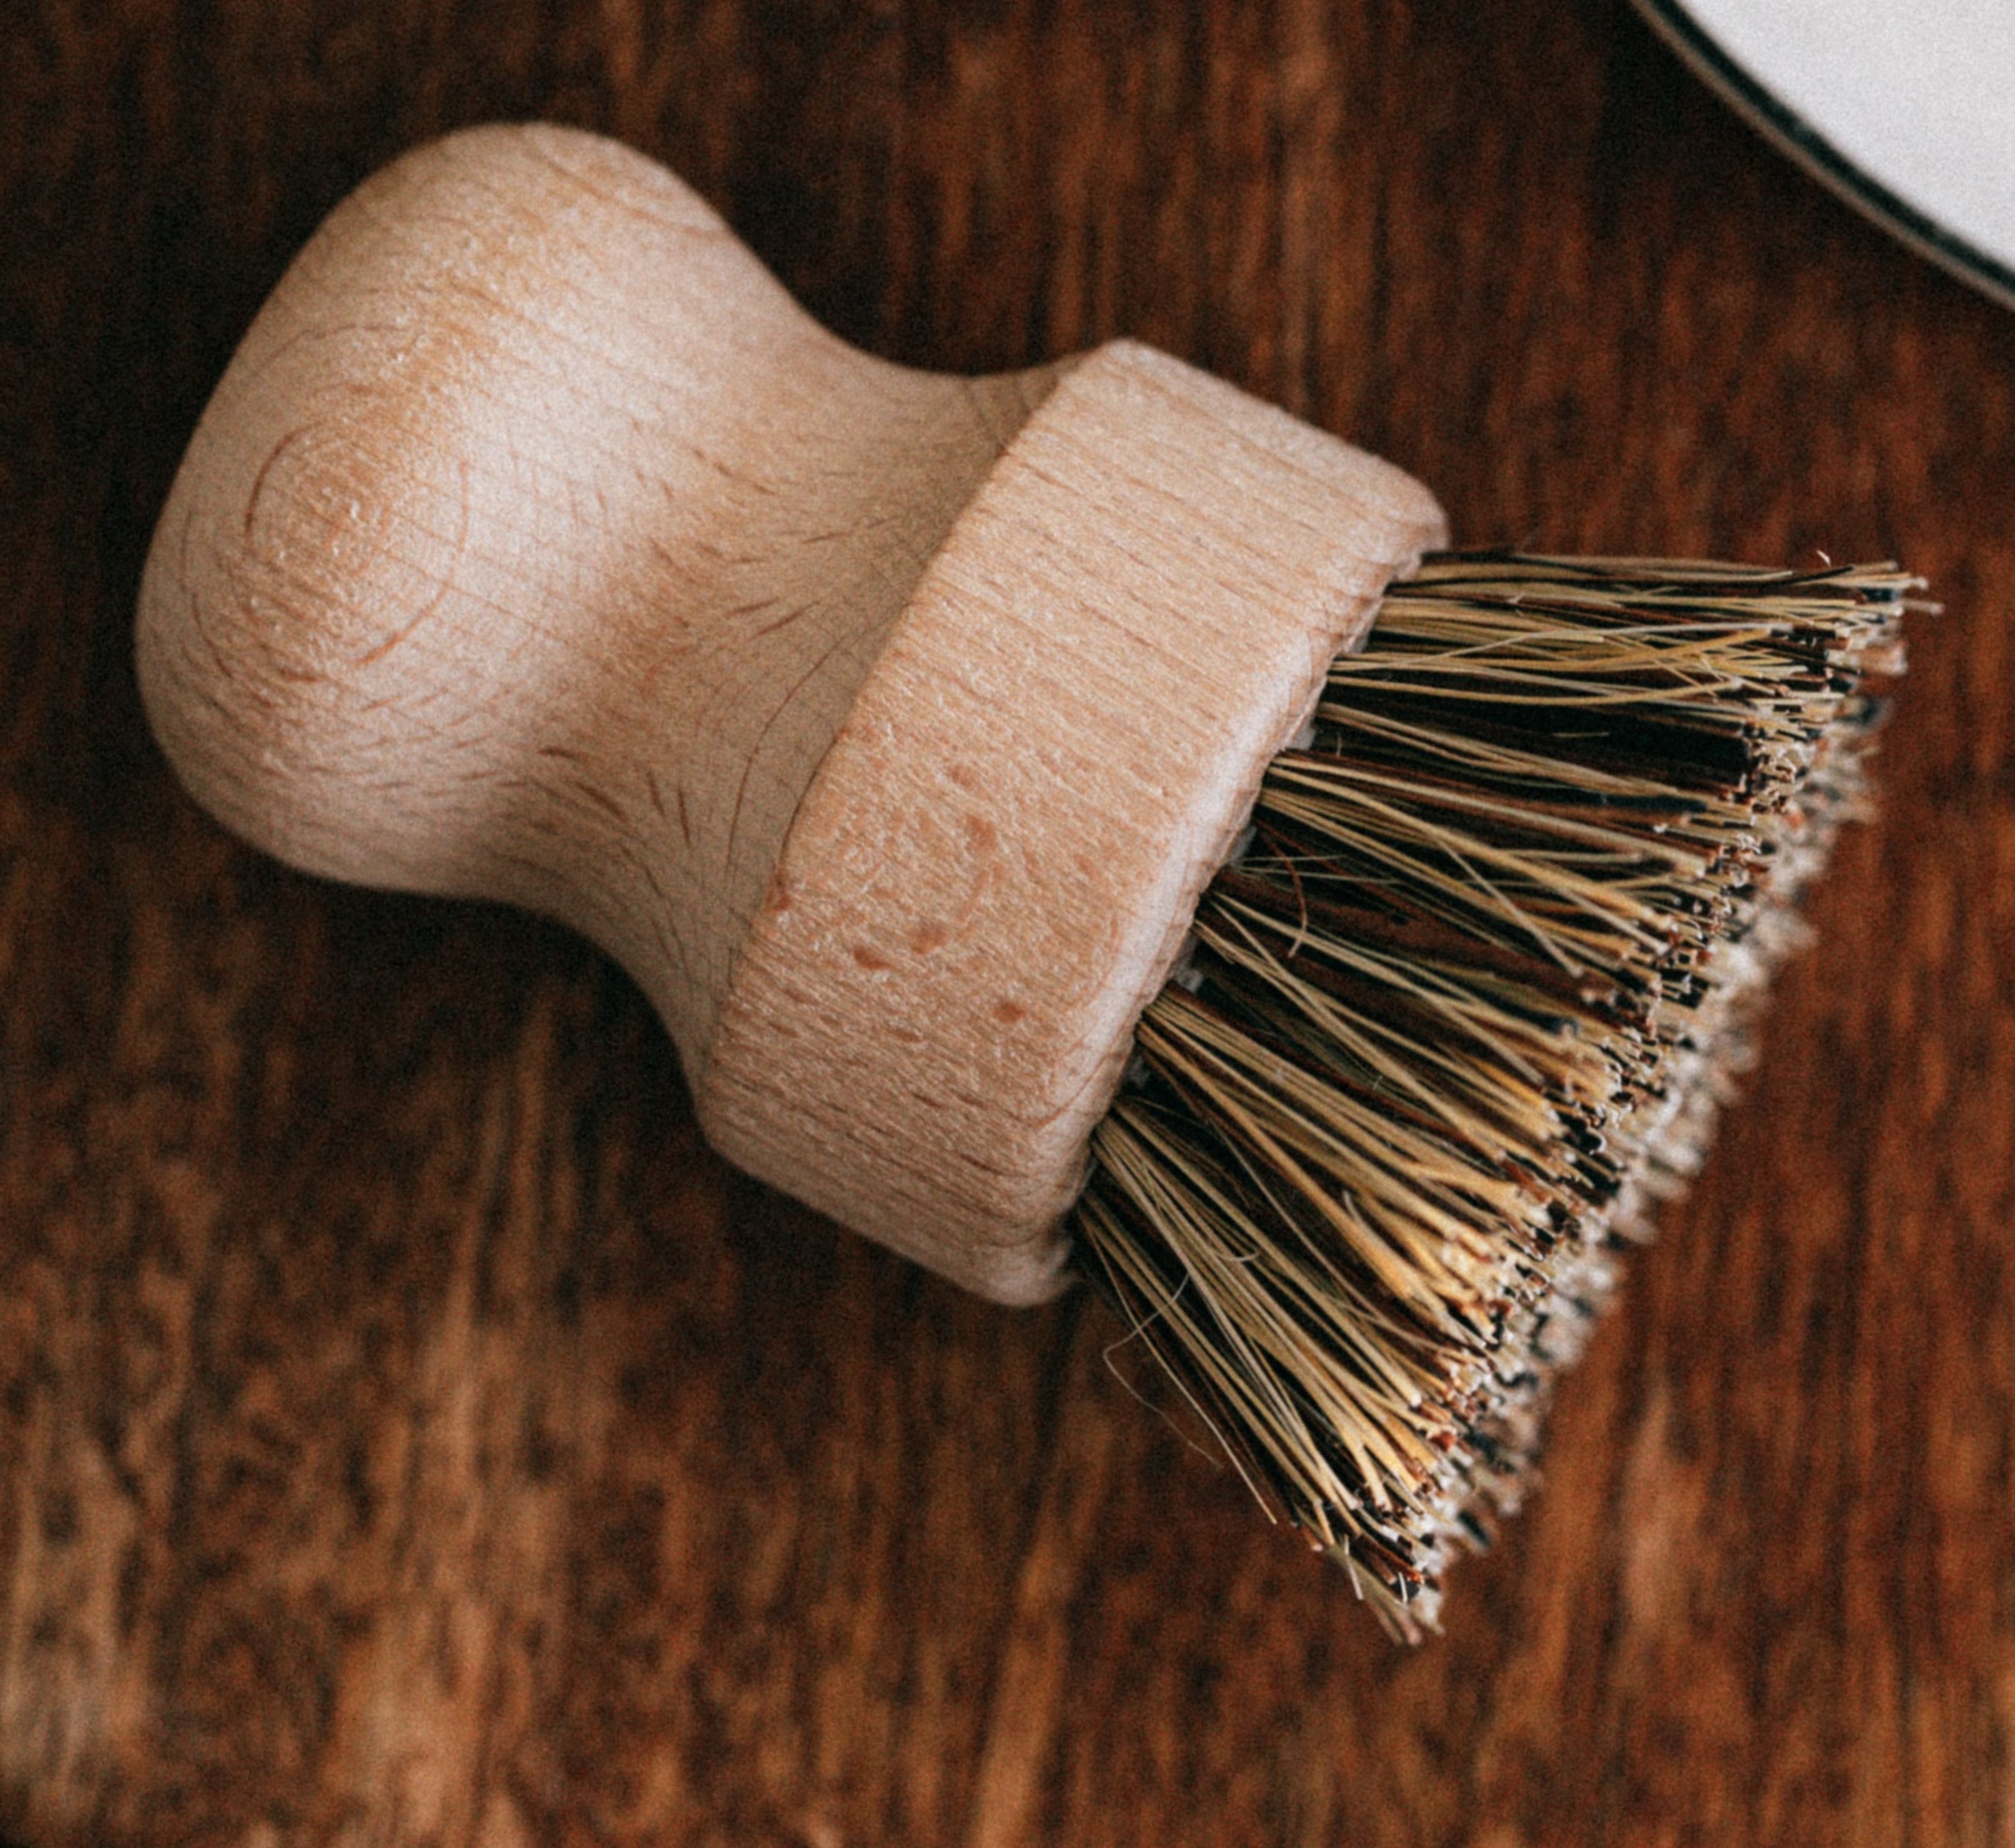 A small, round brush with short bristles.